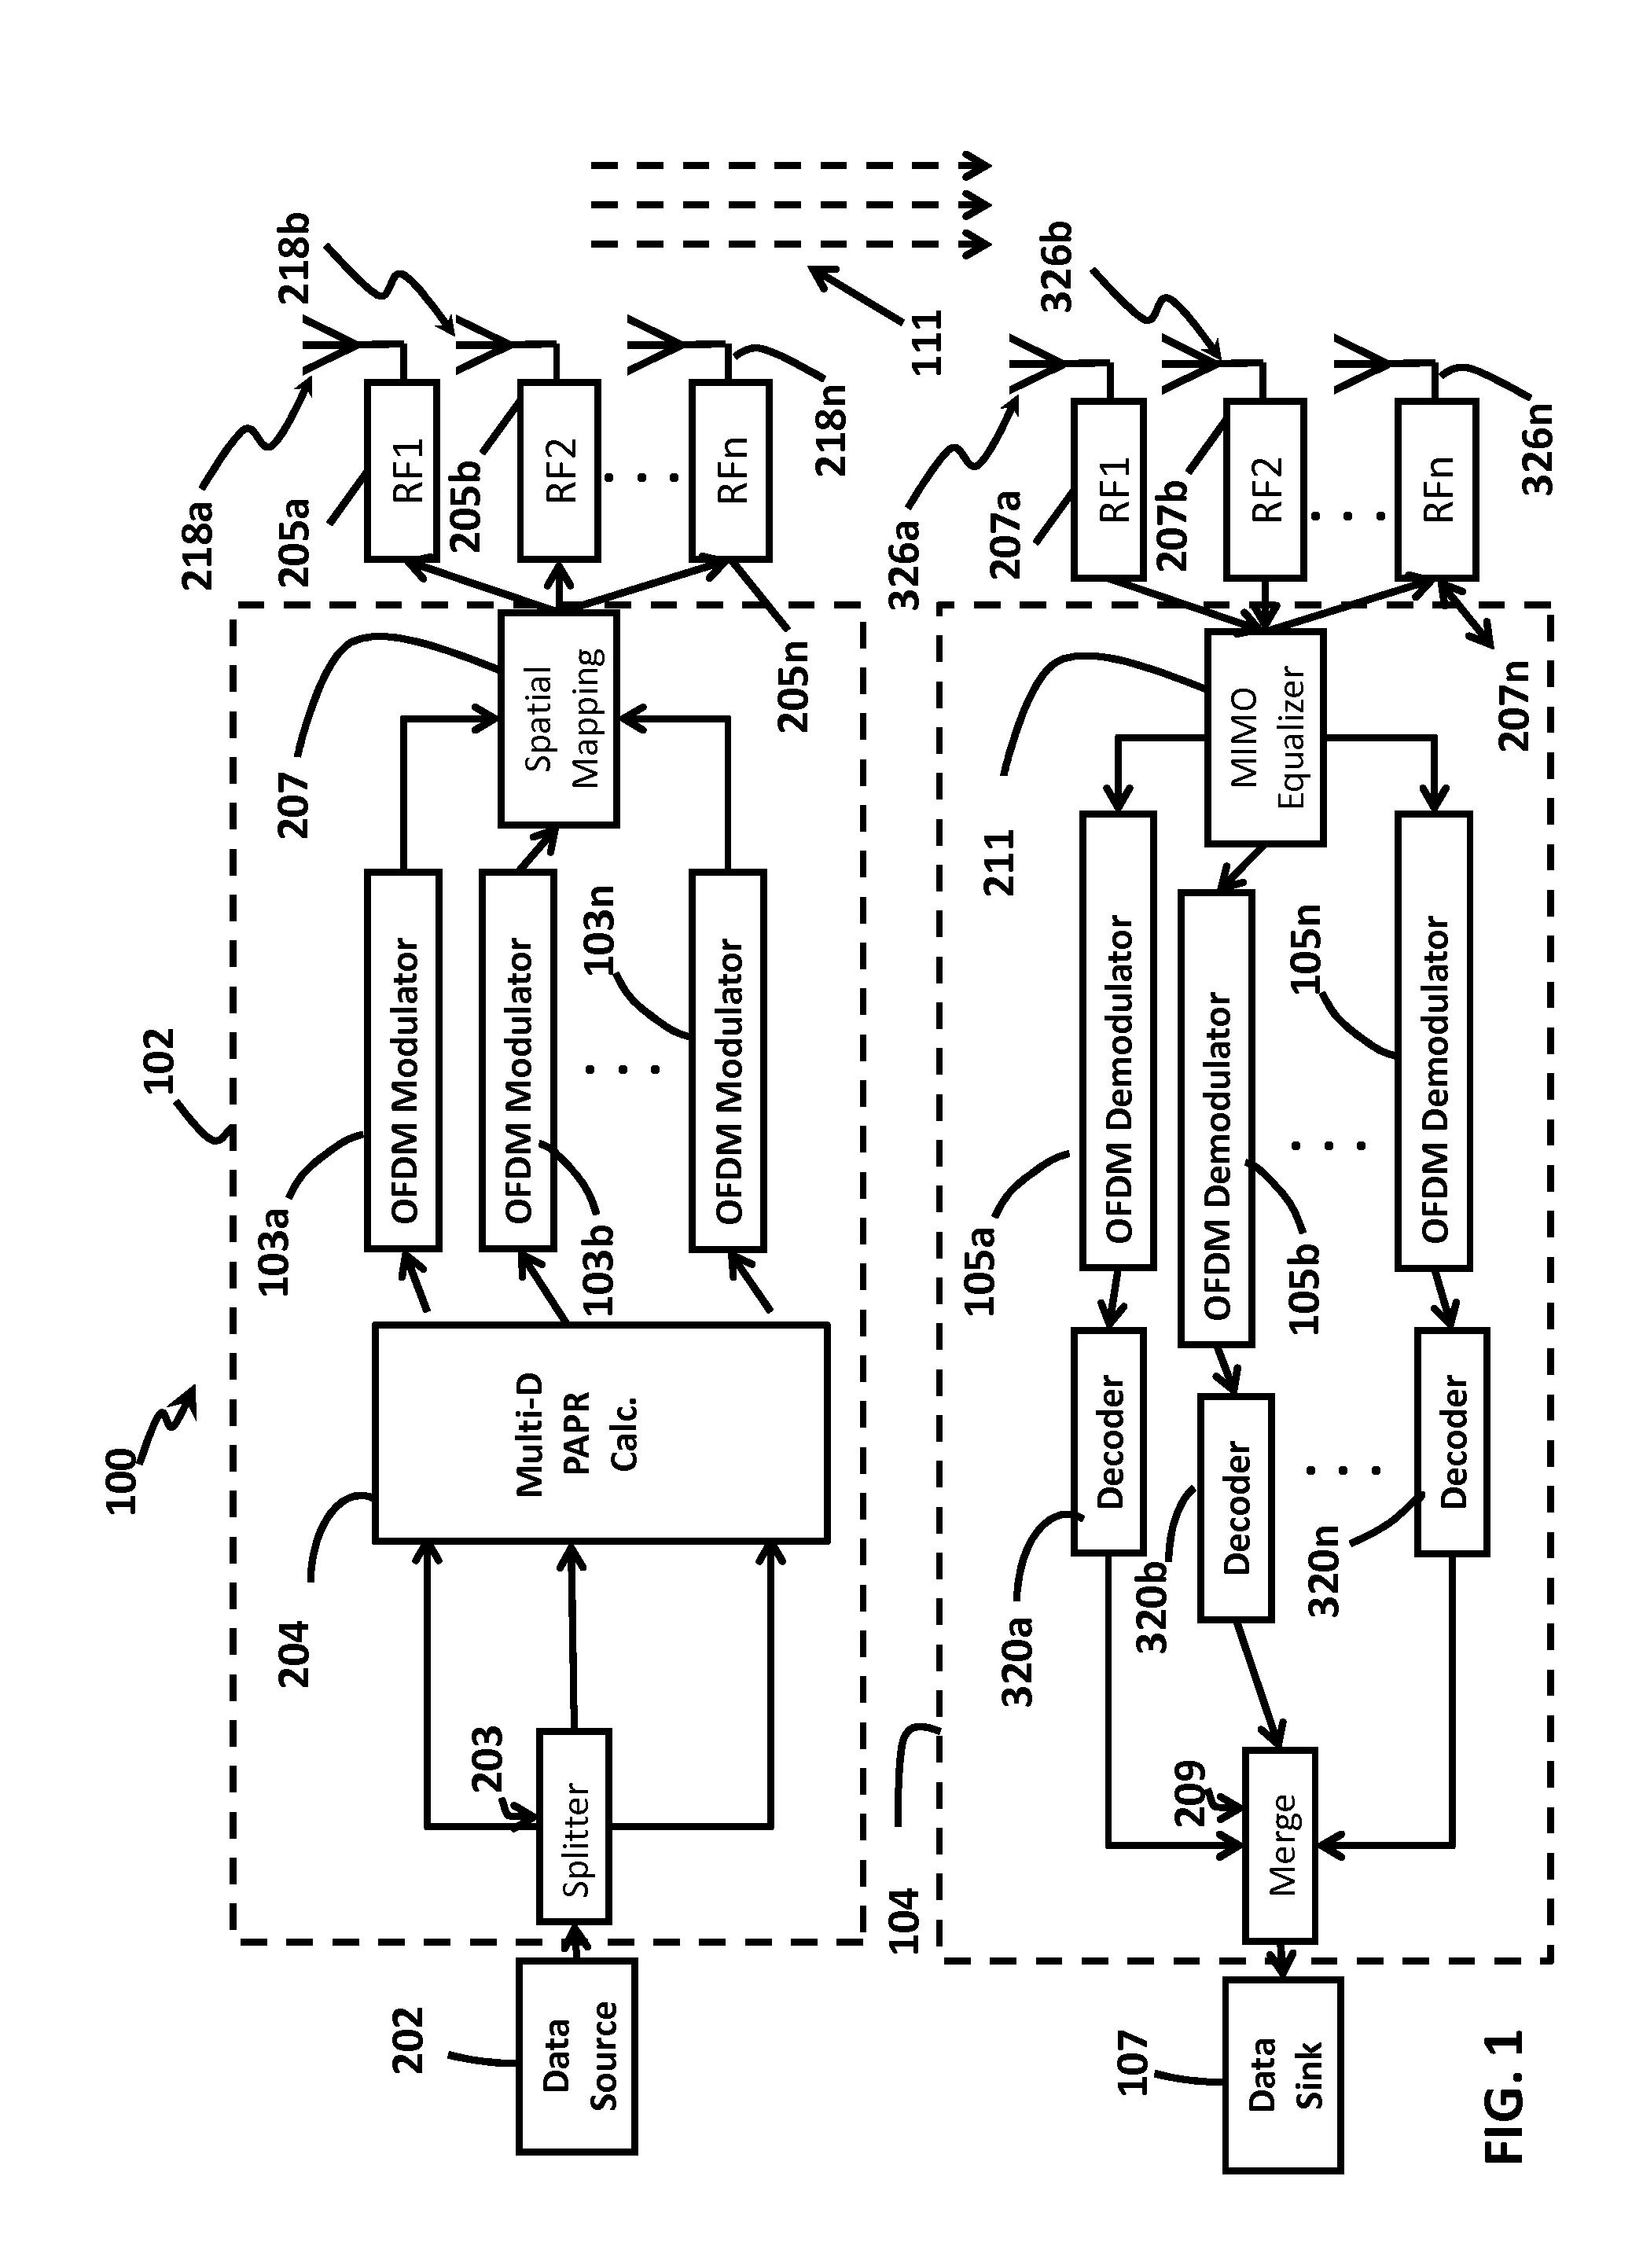 Method and apparatus for controlling out-of-band interference  using peak-to-average-power-ratio (PAPR) reduction with constraints